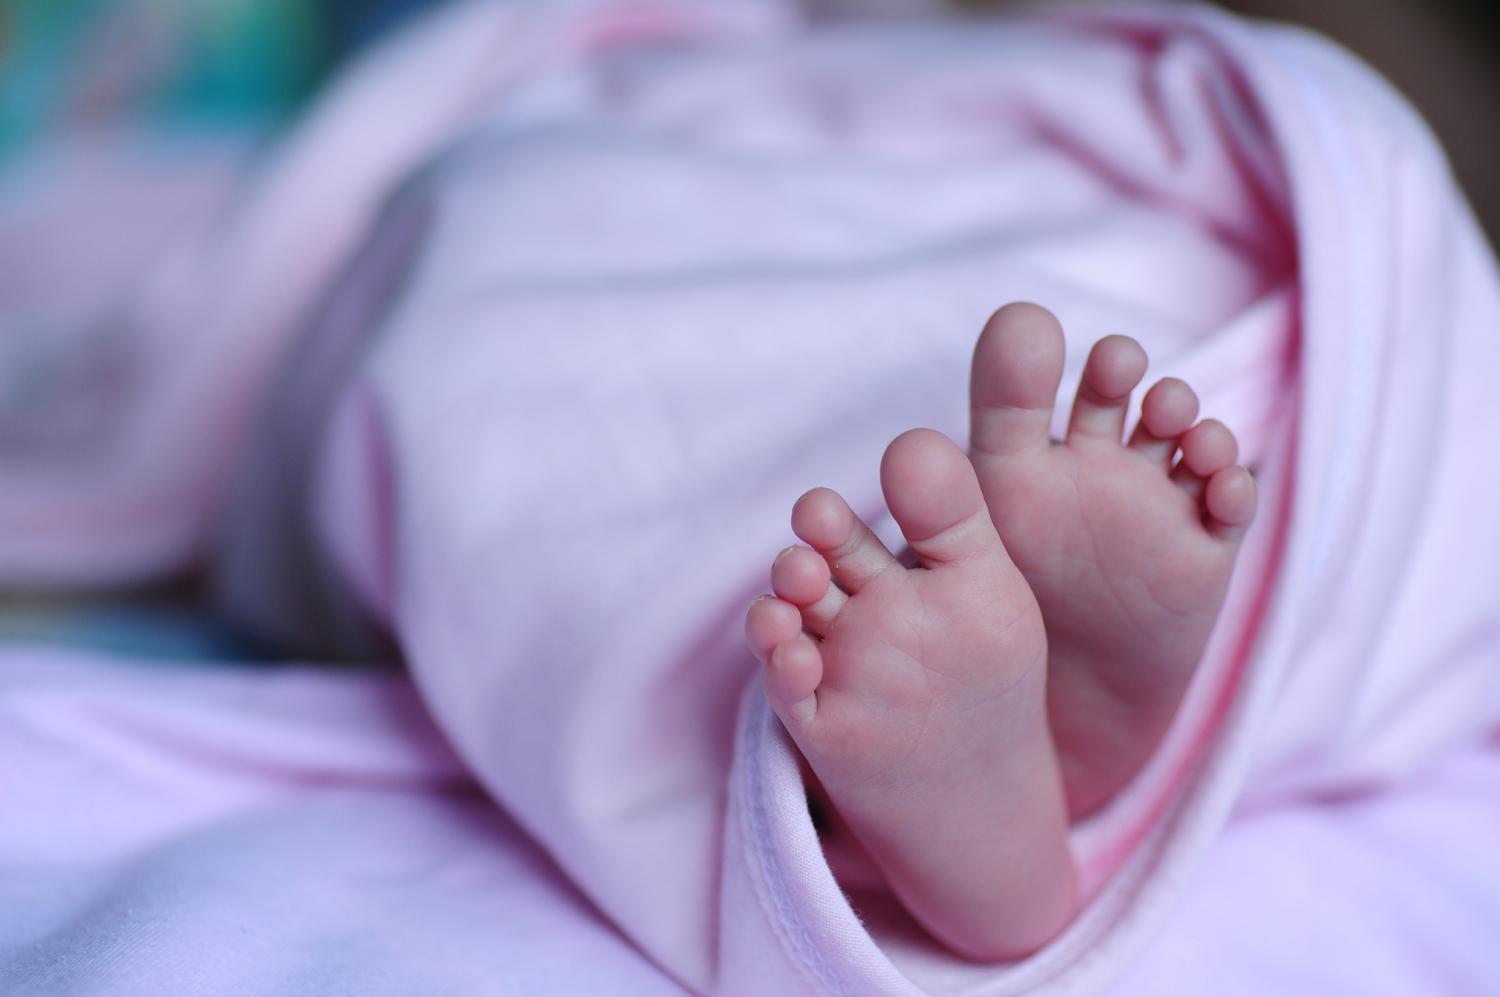 Infant death study reveals dangerous sleep practices among babysitters, relatives, others